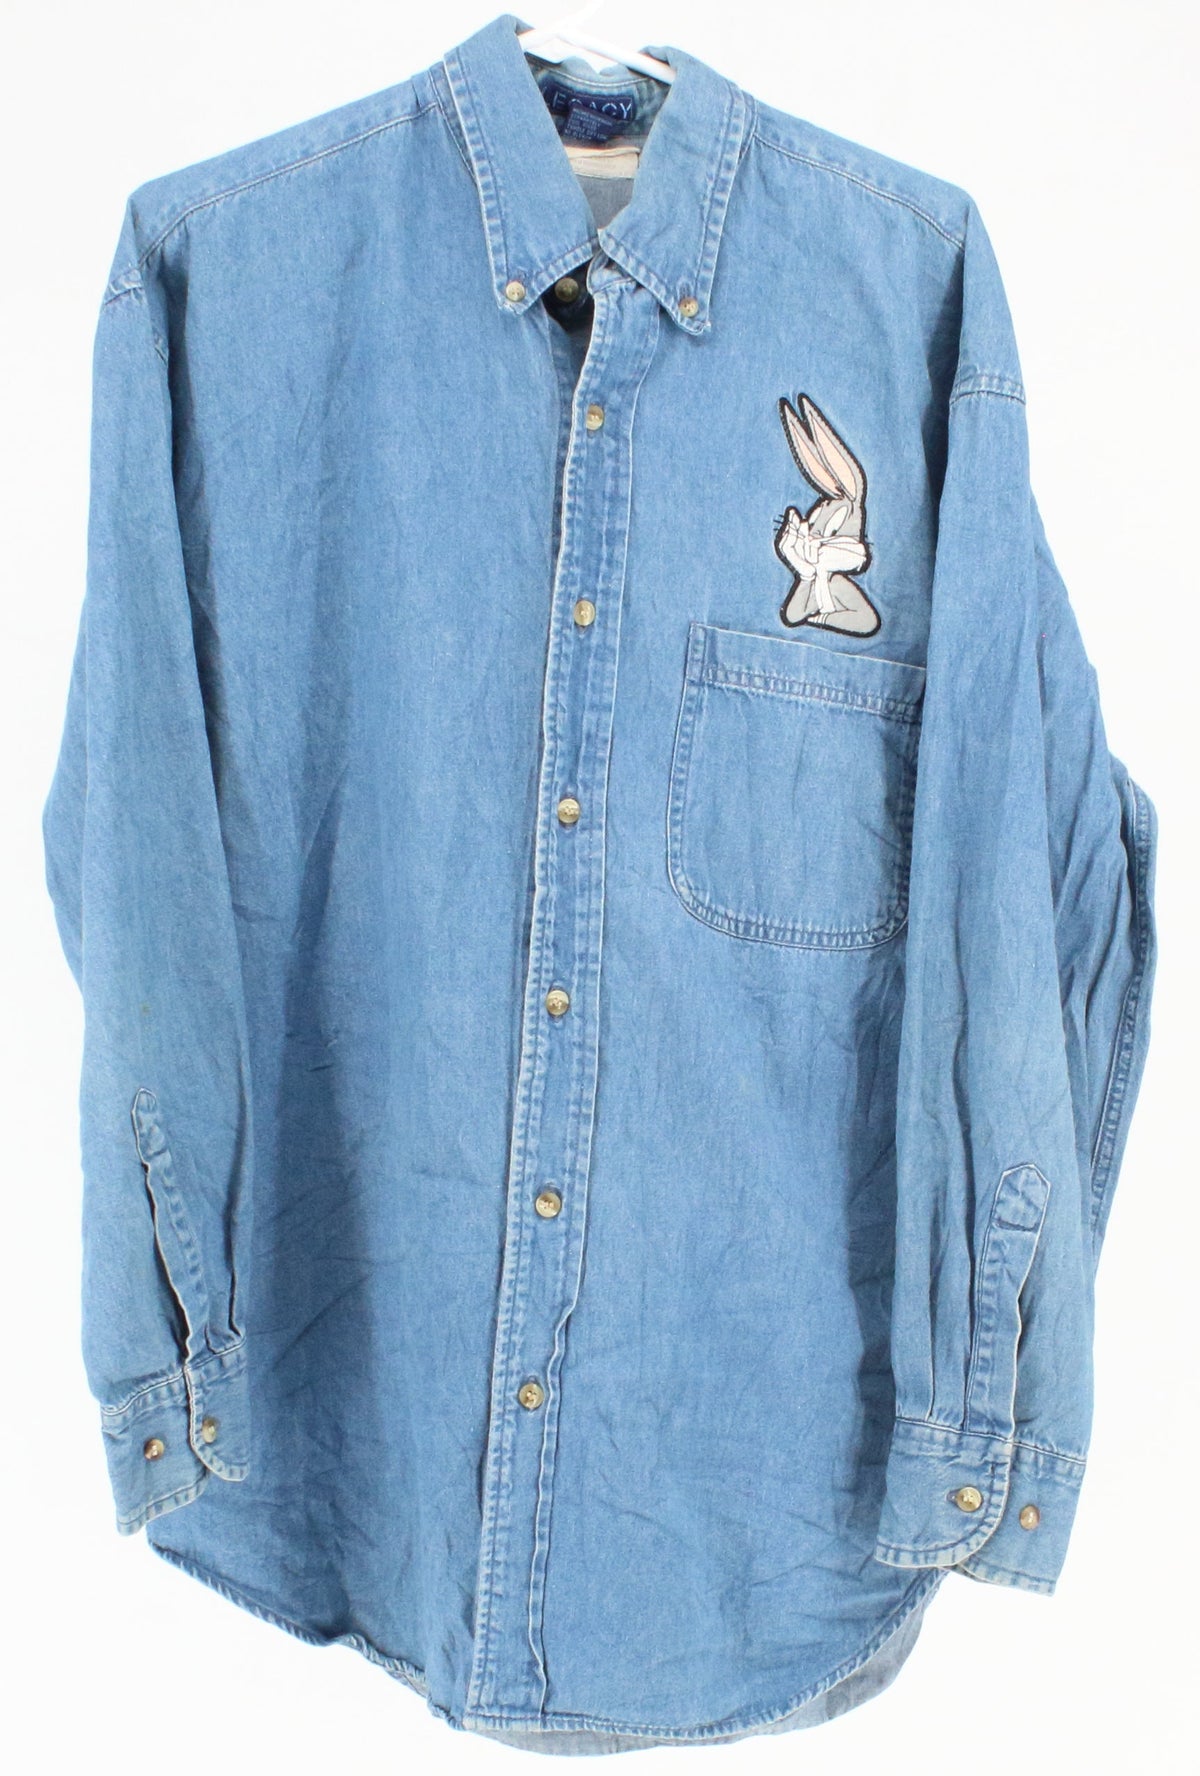 Legacy Looney Tunes Front & Back Bugs Bunny Patch Denim Shirt